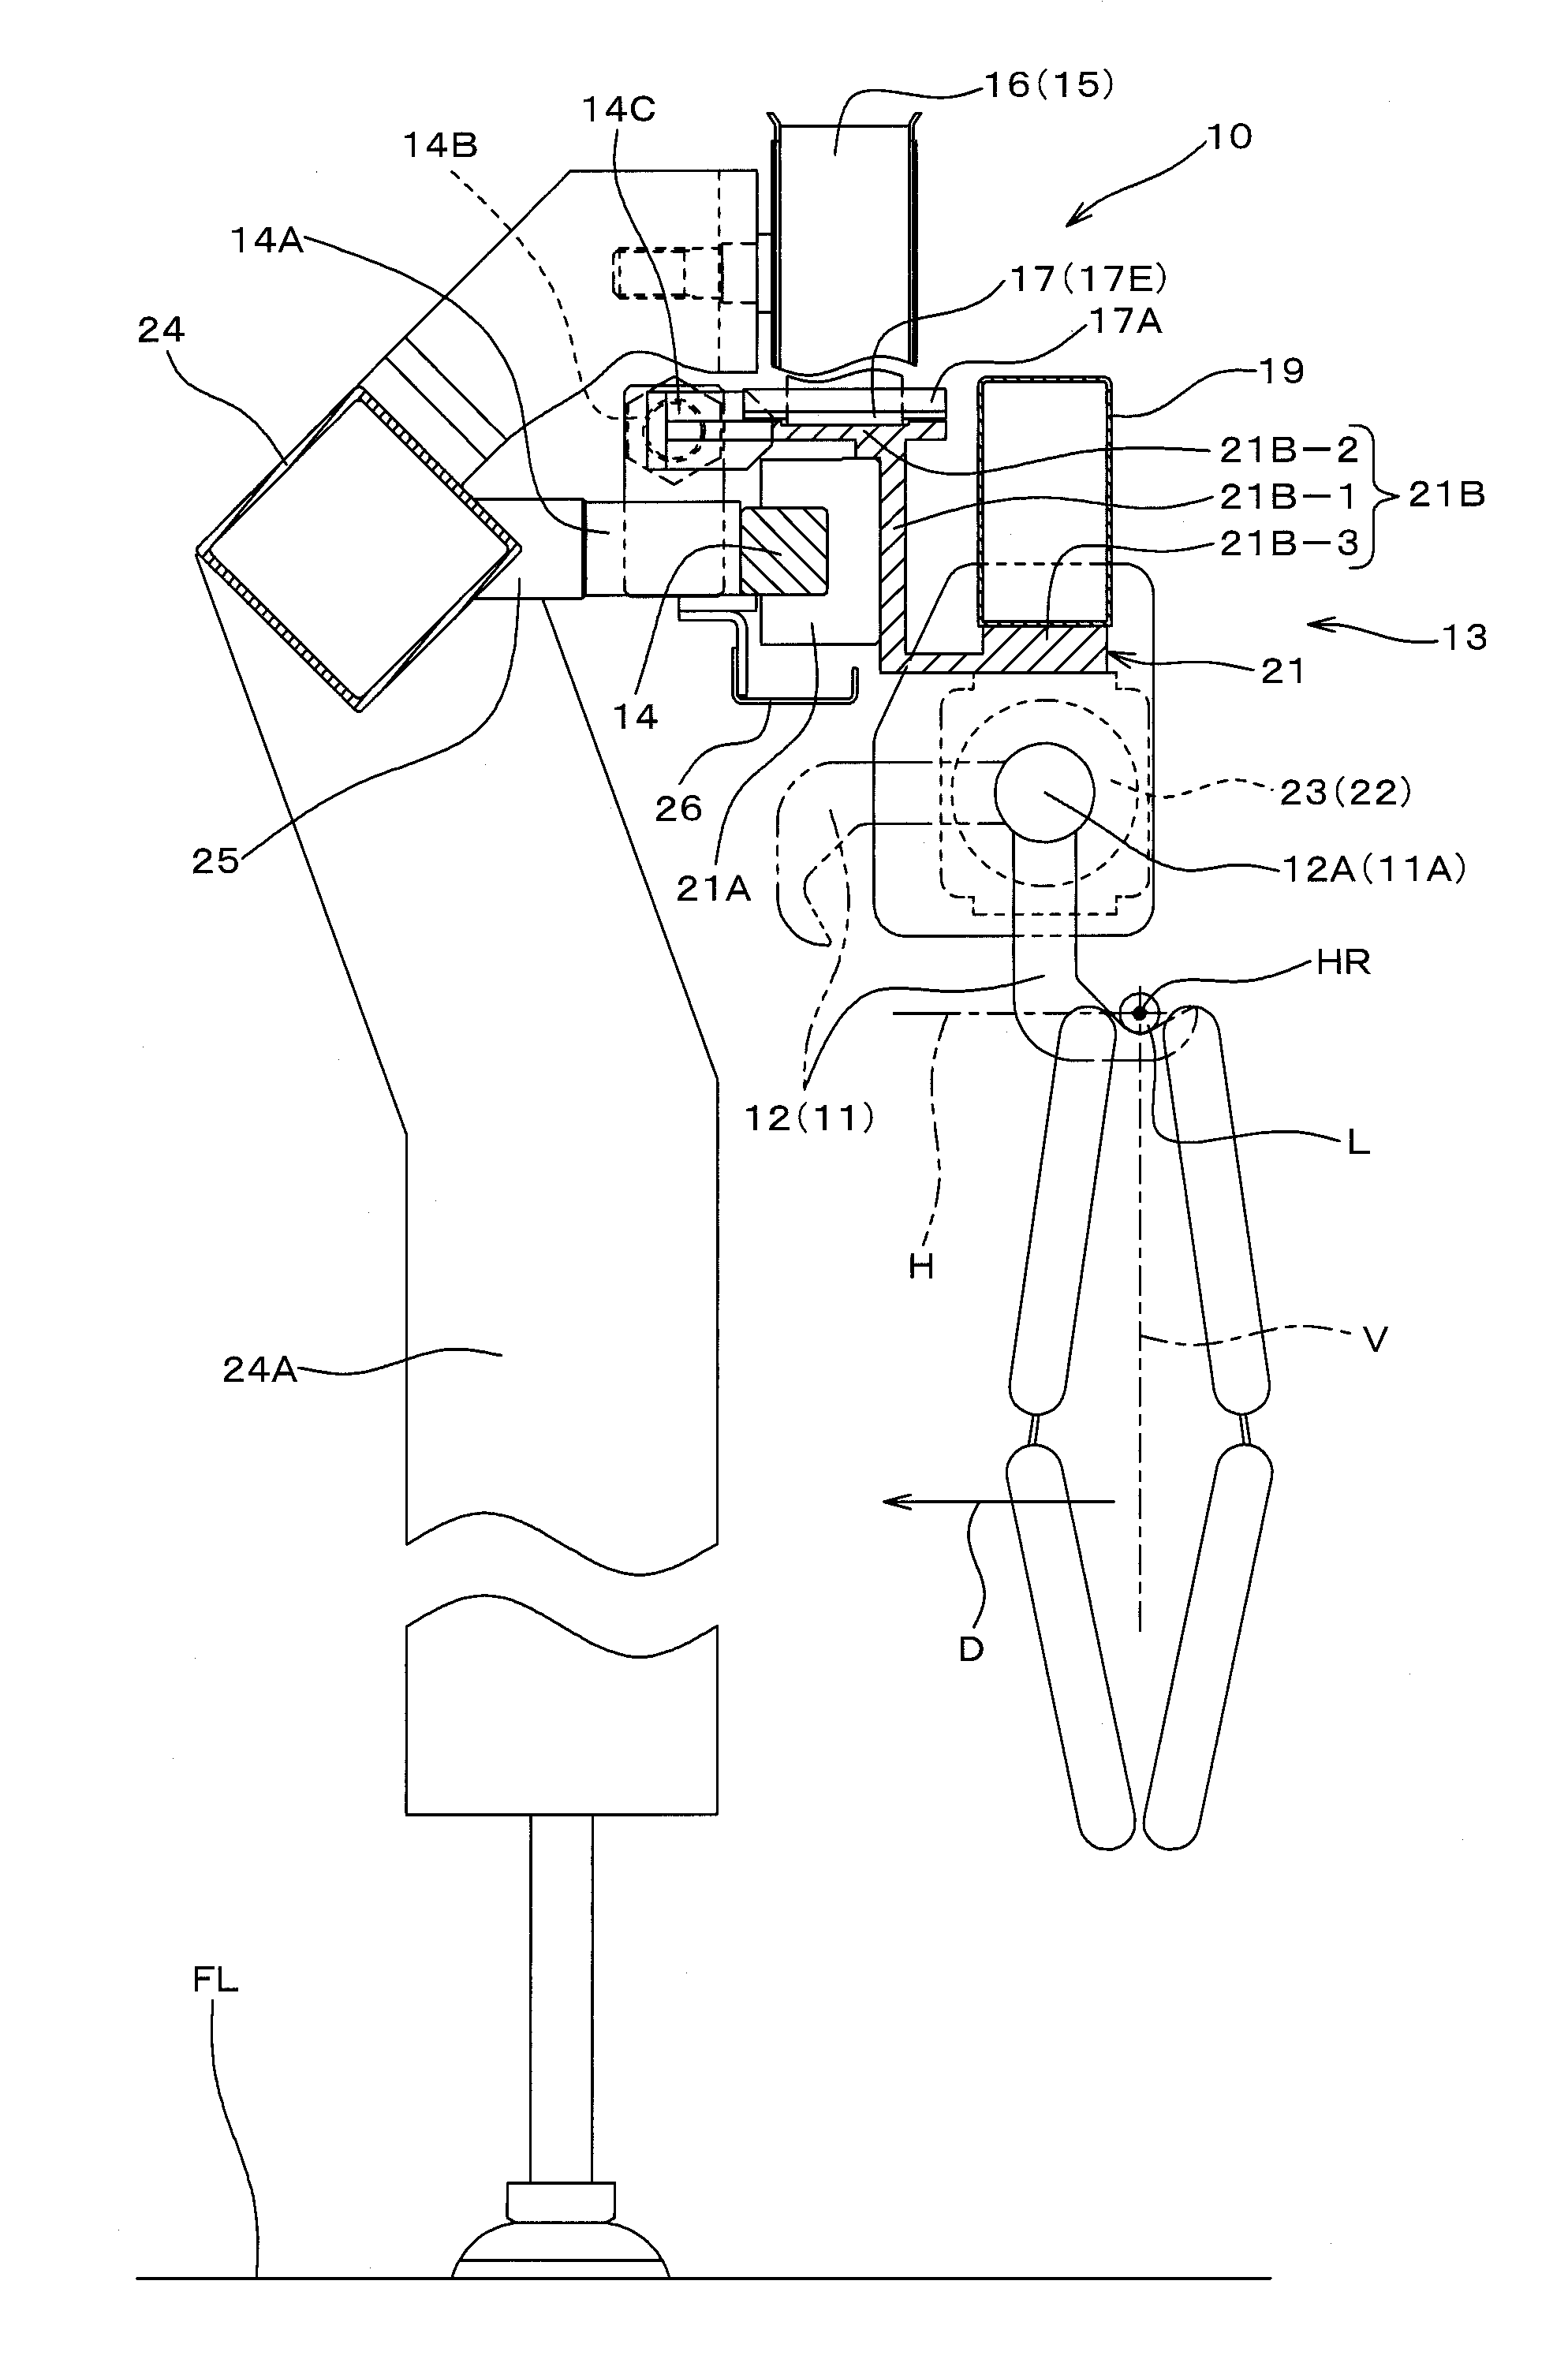 Apparatus for transferring a stick with a strand of sausage or the like suspended therefrom